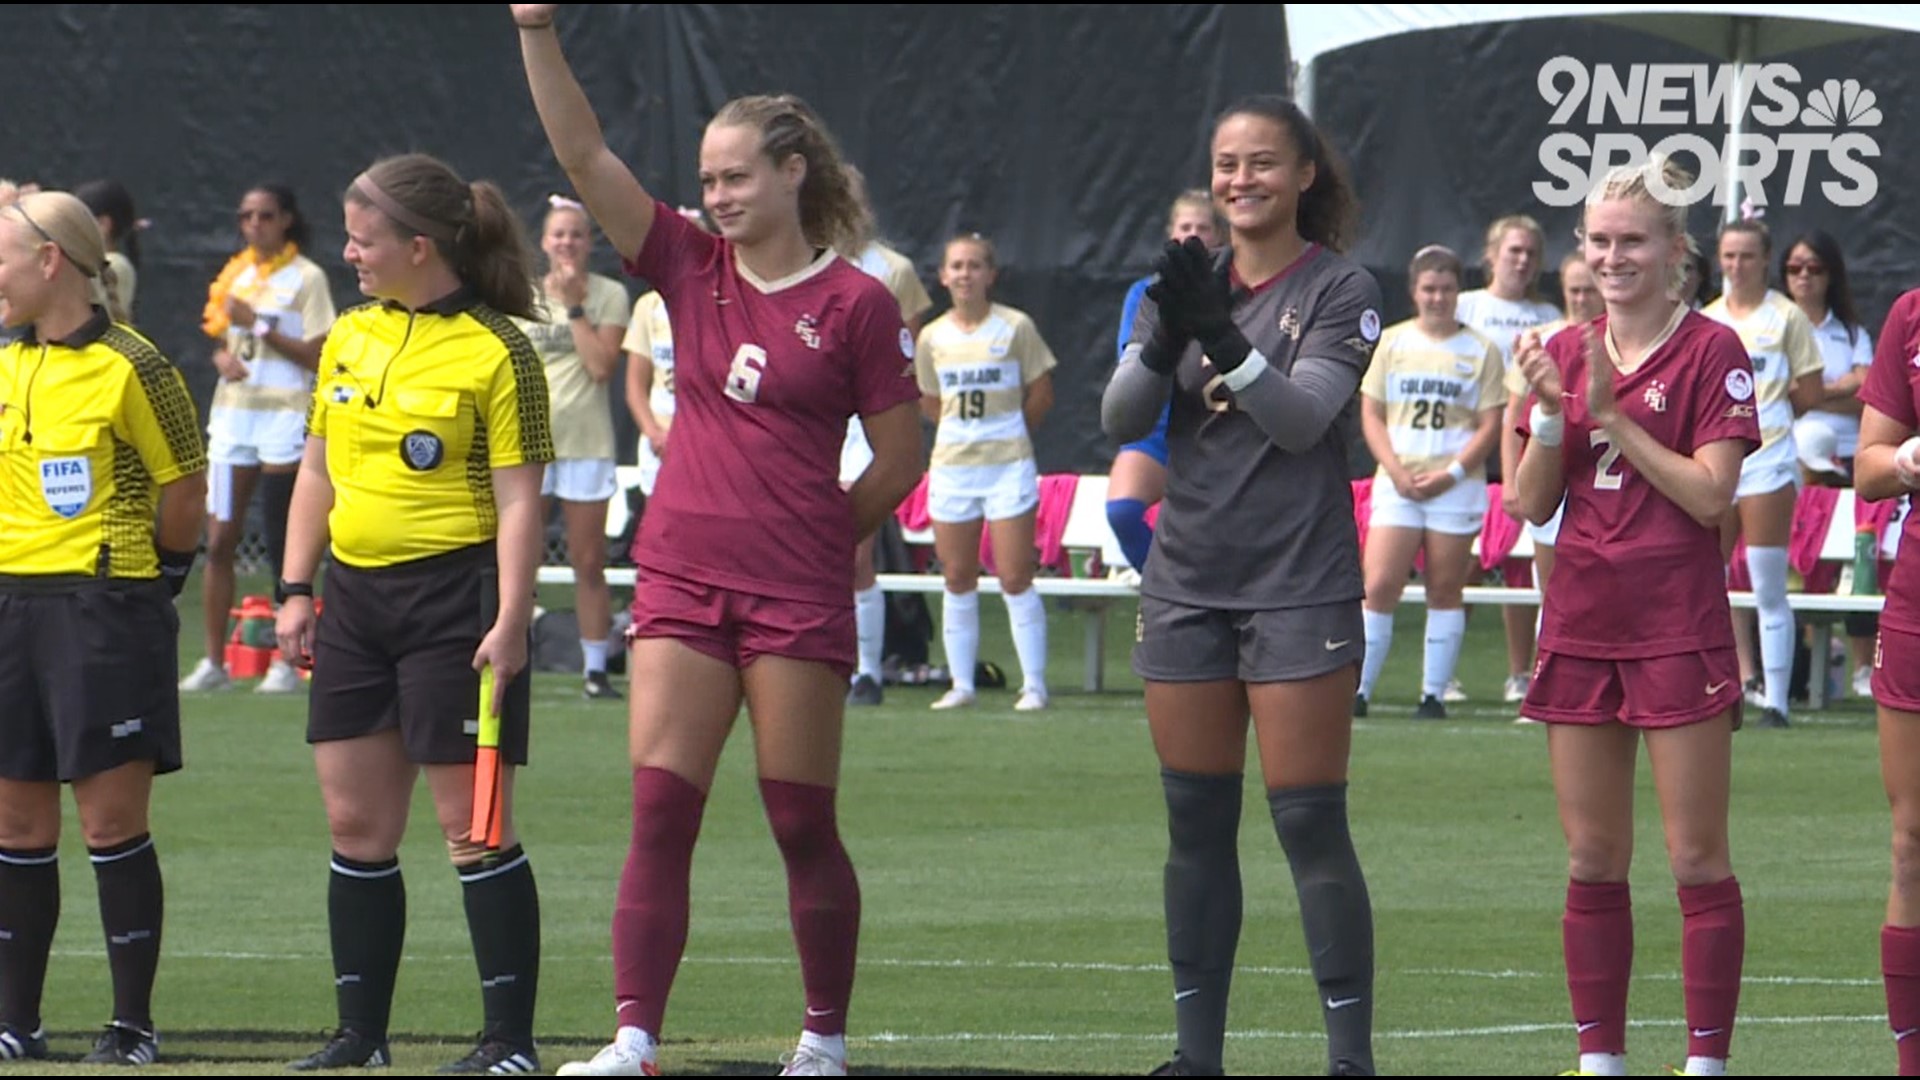 Fossil Ridge graduate Jaelin Howell returned to Colorado with her Florida State soccer team. She celebrated with family and reminisced on her time with the USWNT.